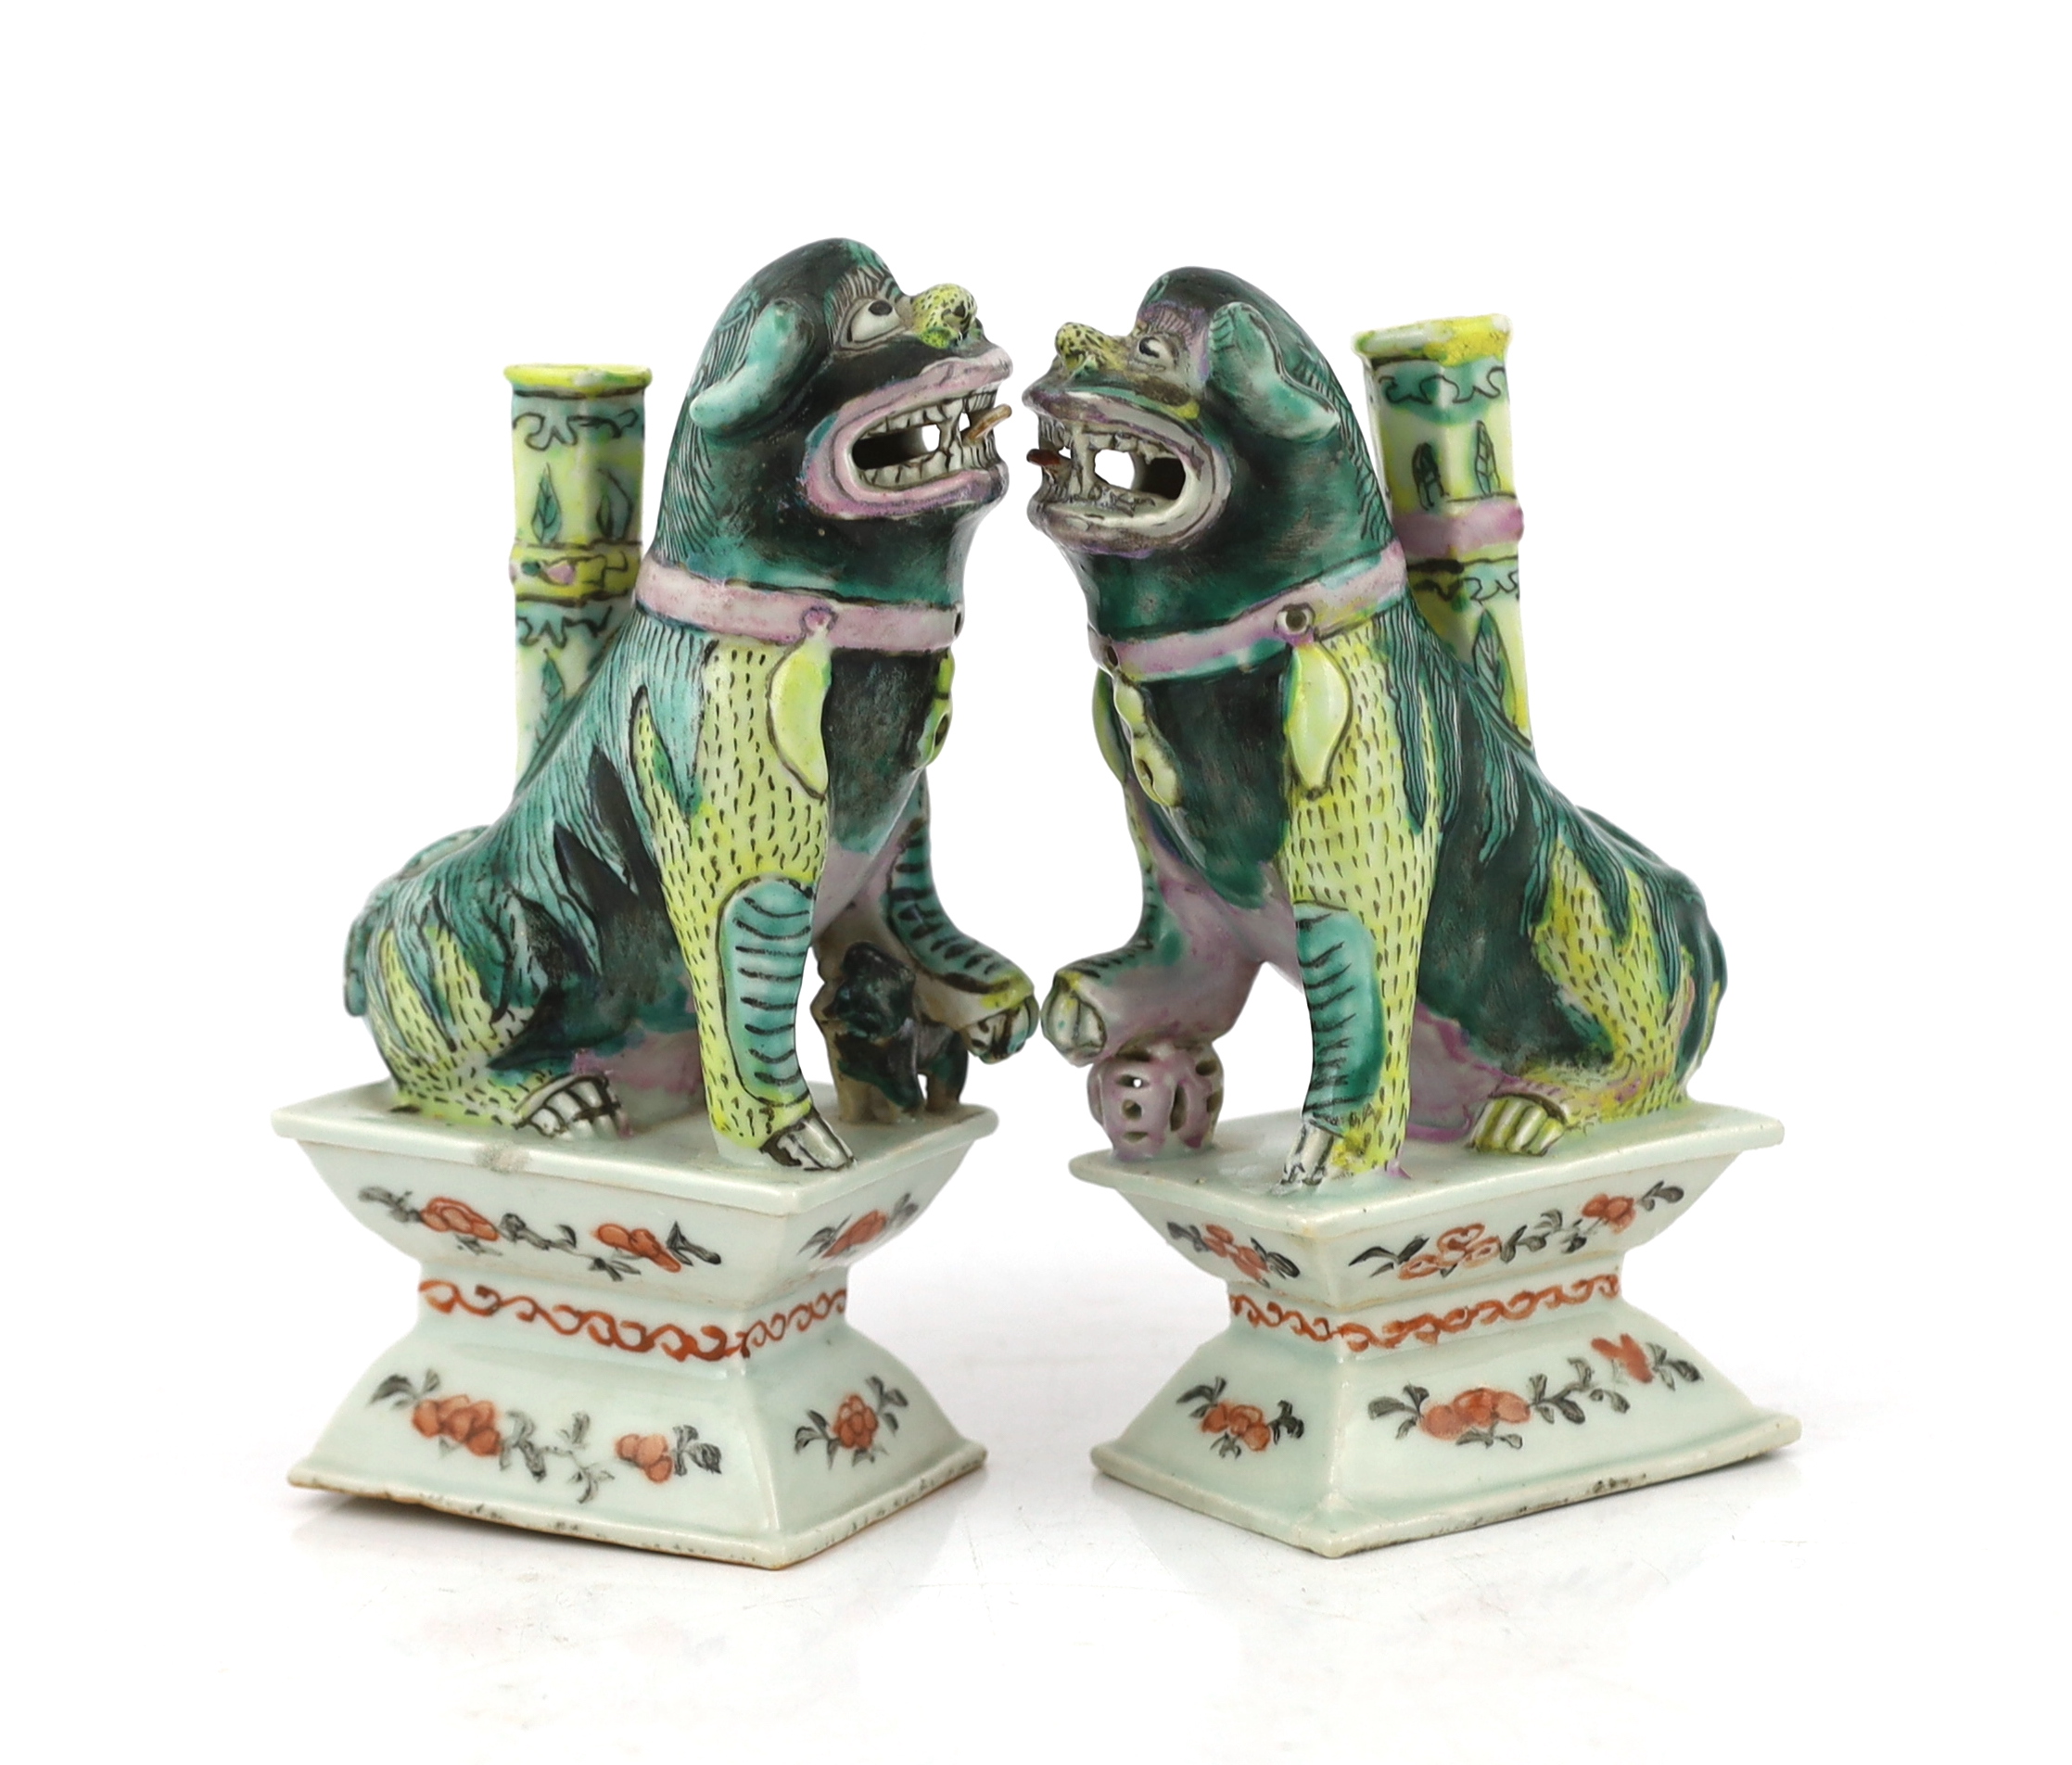 A pair of Chinese enamelled porcelain ‘Buddhist lion’ joss stick holders, early 19th century